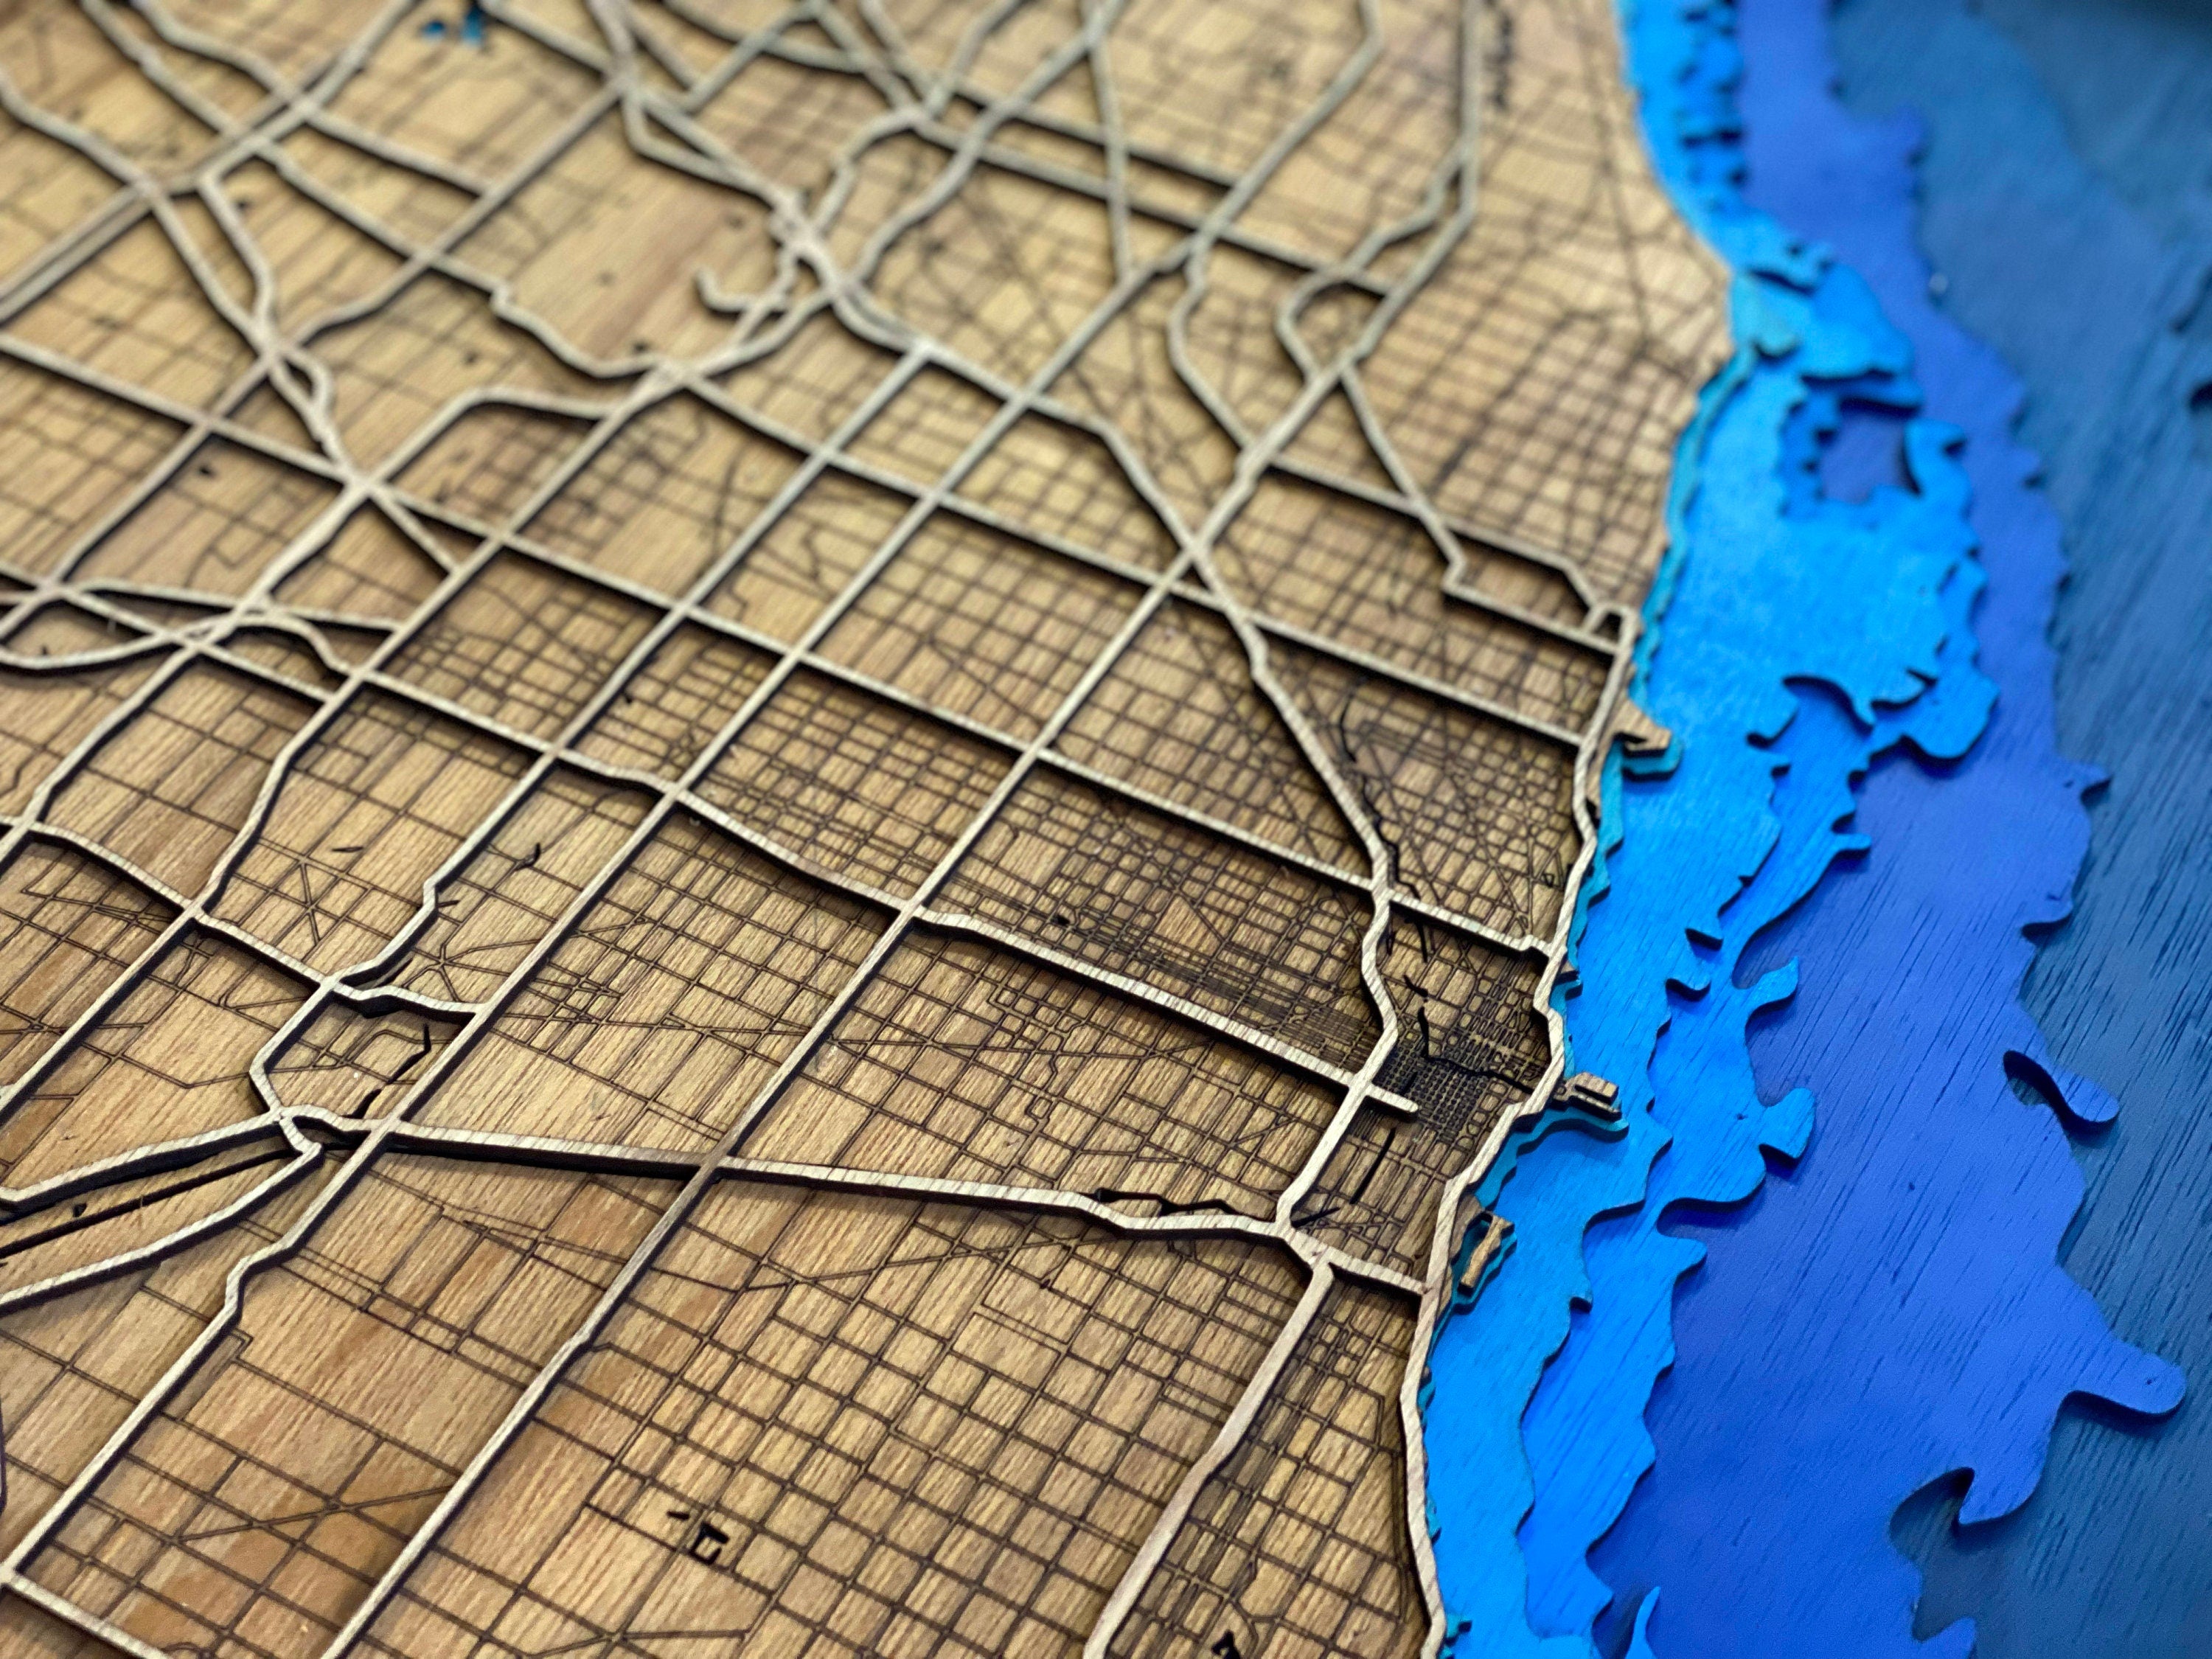 Handcrafted City Map Coffee Table - 100% Made in the USA. Choose your own city!